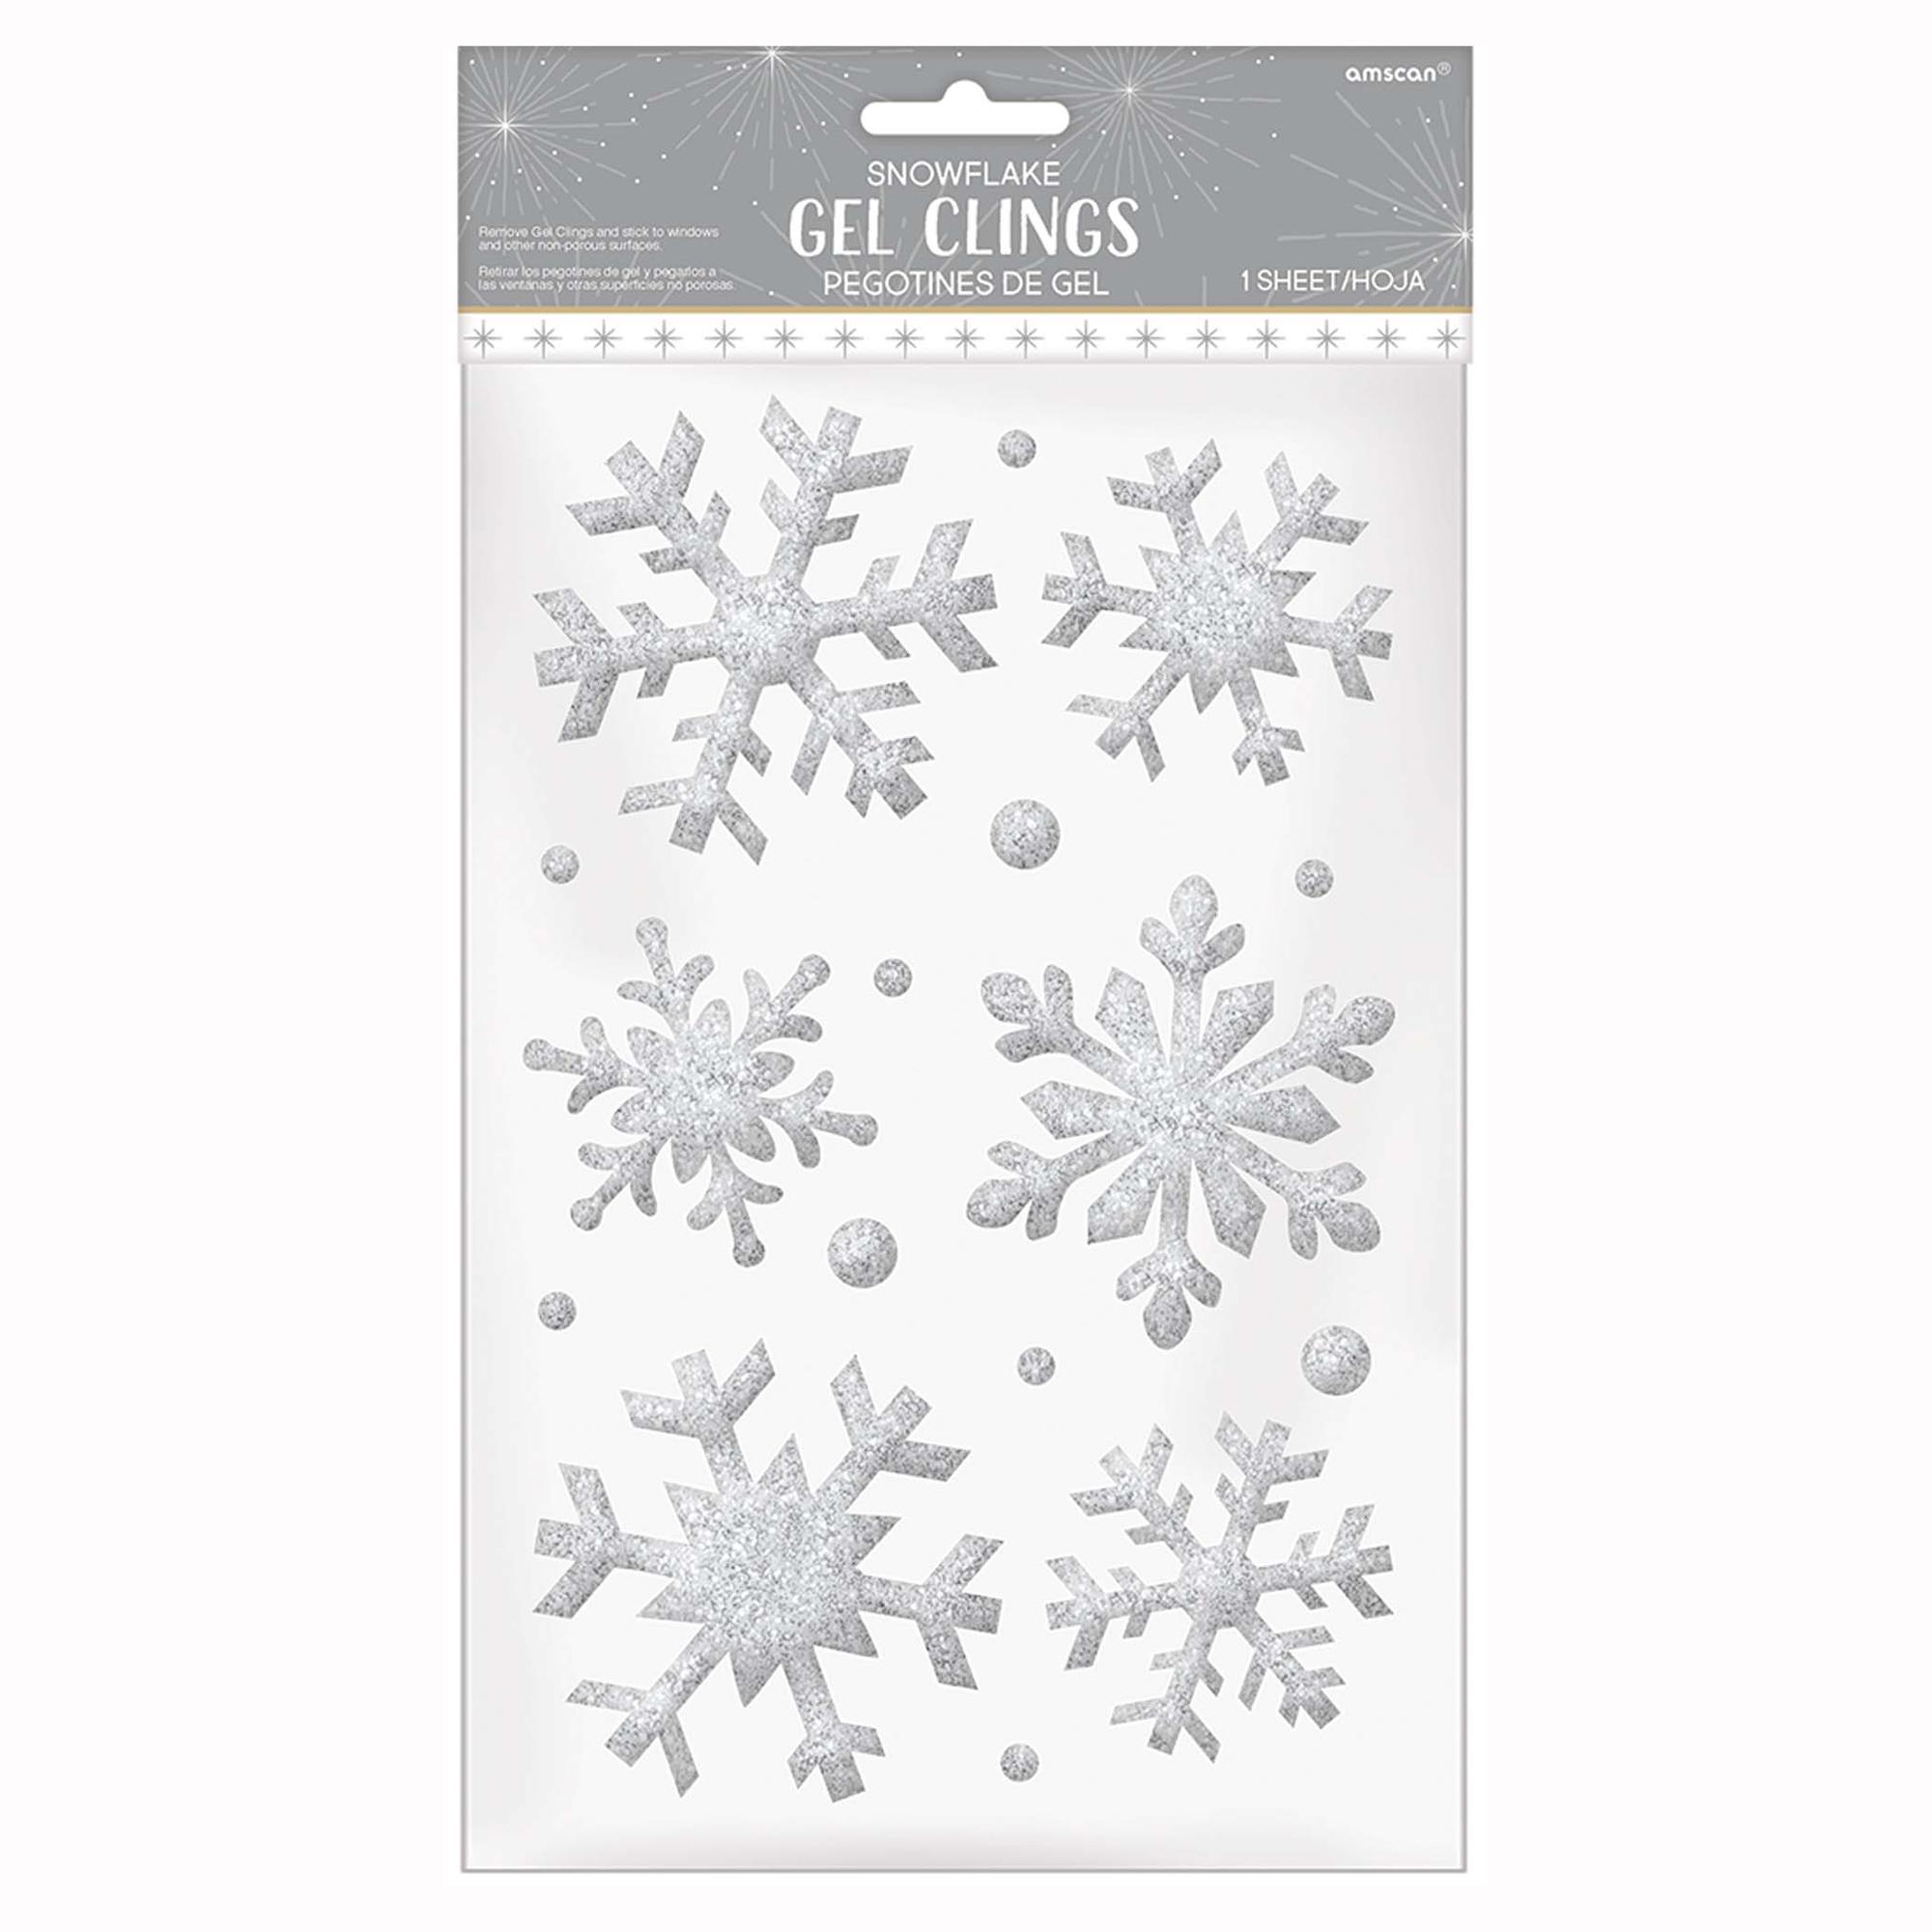 Snowflakes Small Glitter Gel Cling Decorations - Party Centre